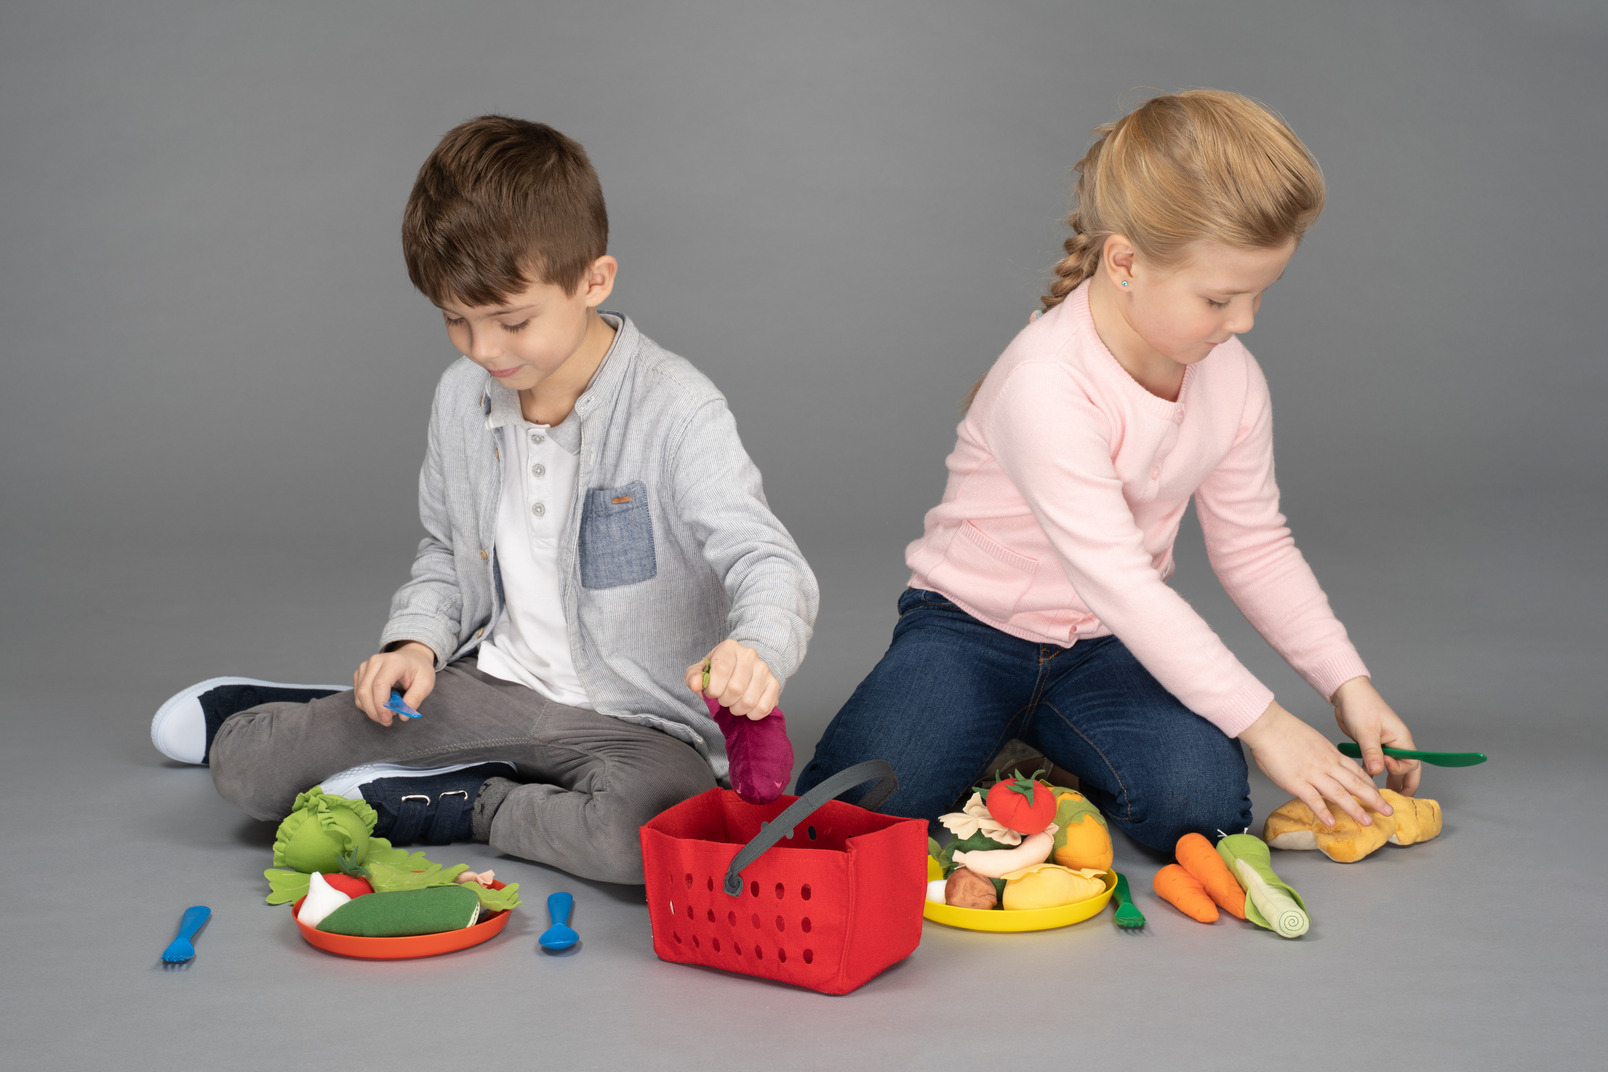 Kids playing with food toys